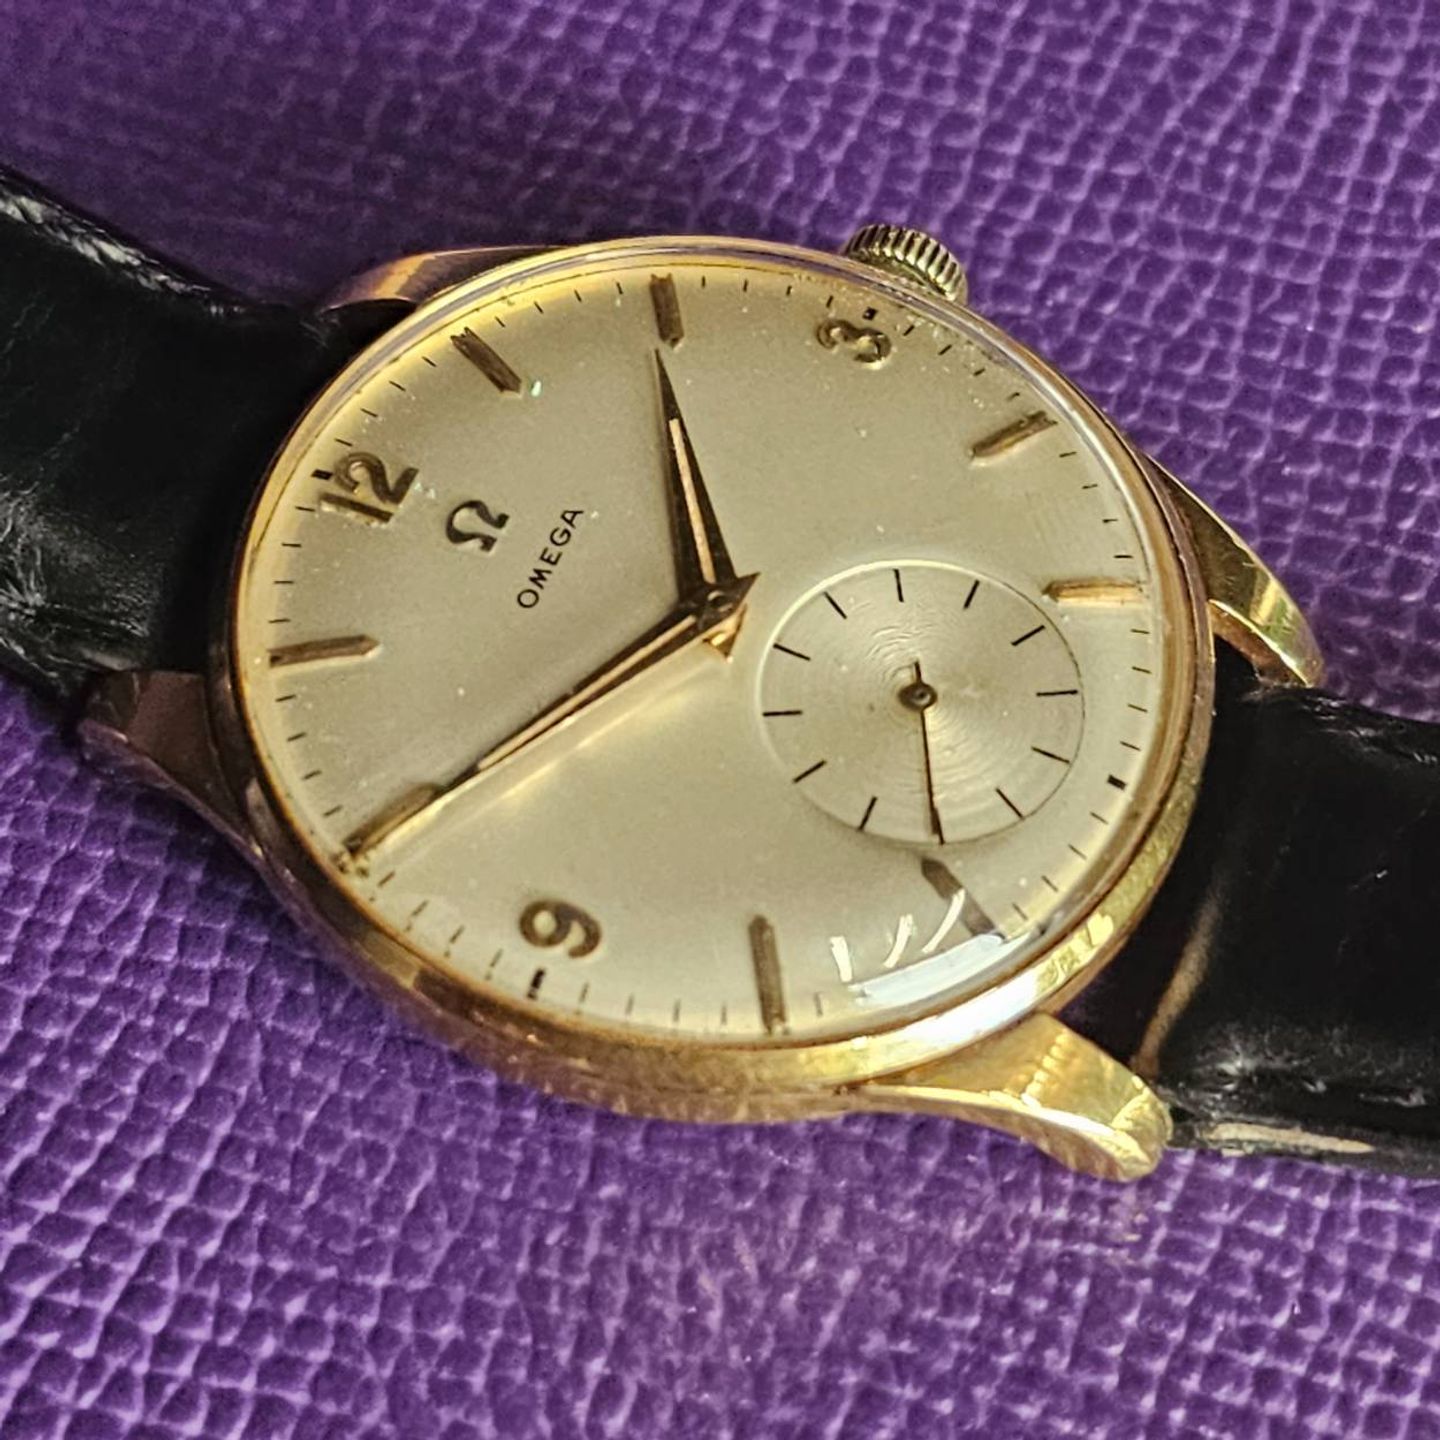 Omega Vintage 2620 (1950) - Champagne wijzerplaat 38mm Staal (1/5)